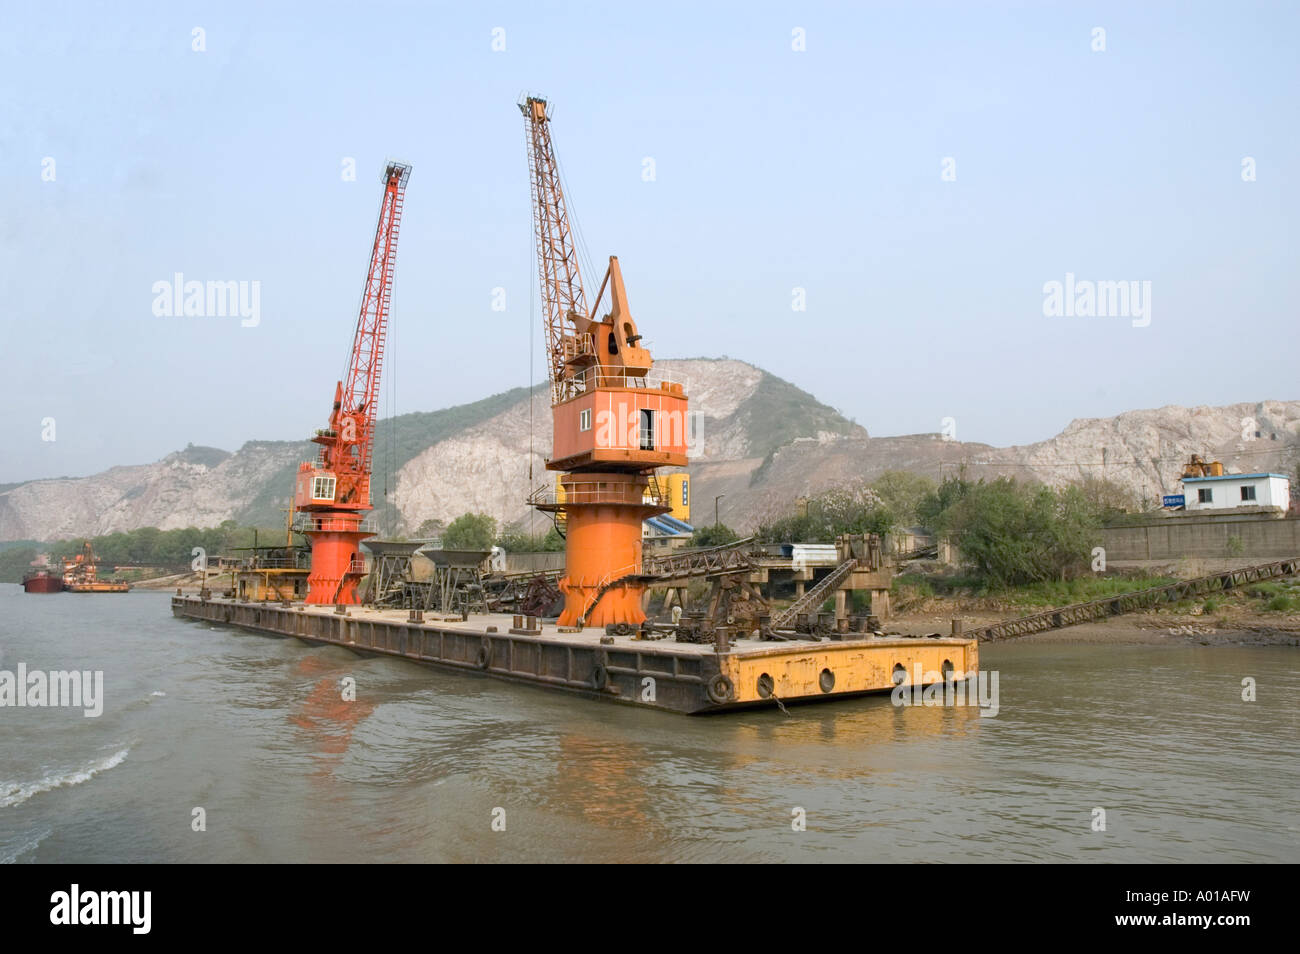 A floating dock carrying two large orange cranes on the Yangtze River, Nanjing, China Stock Photo